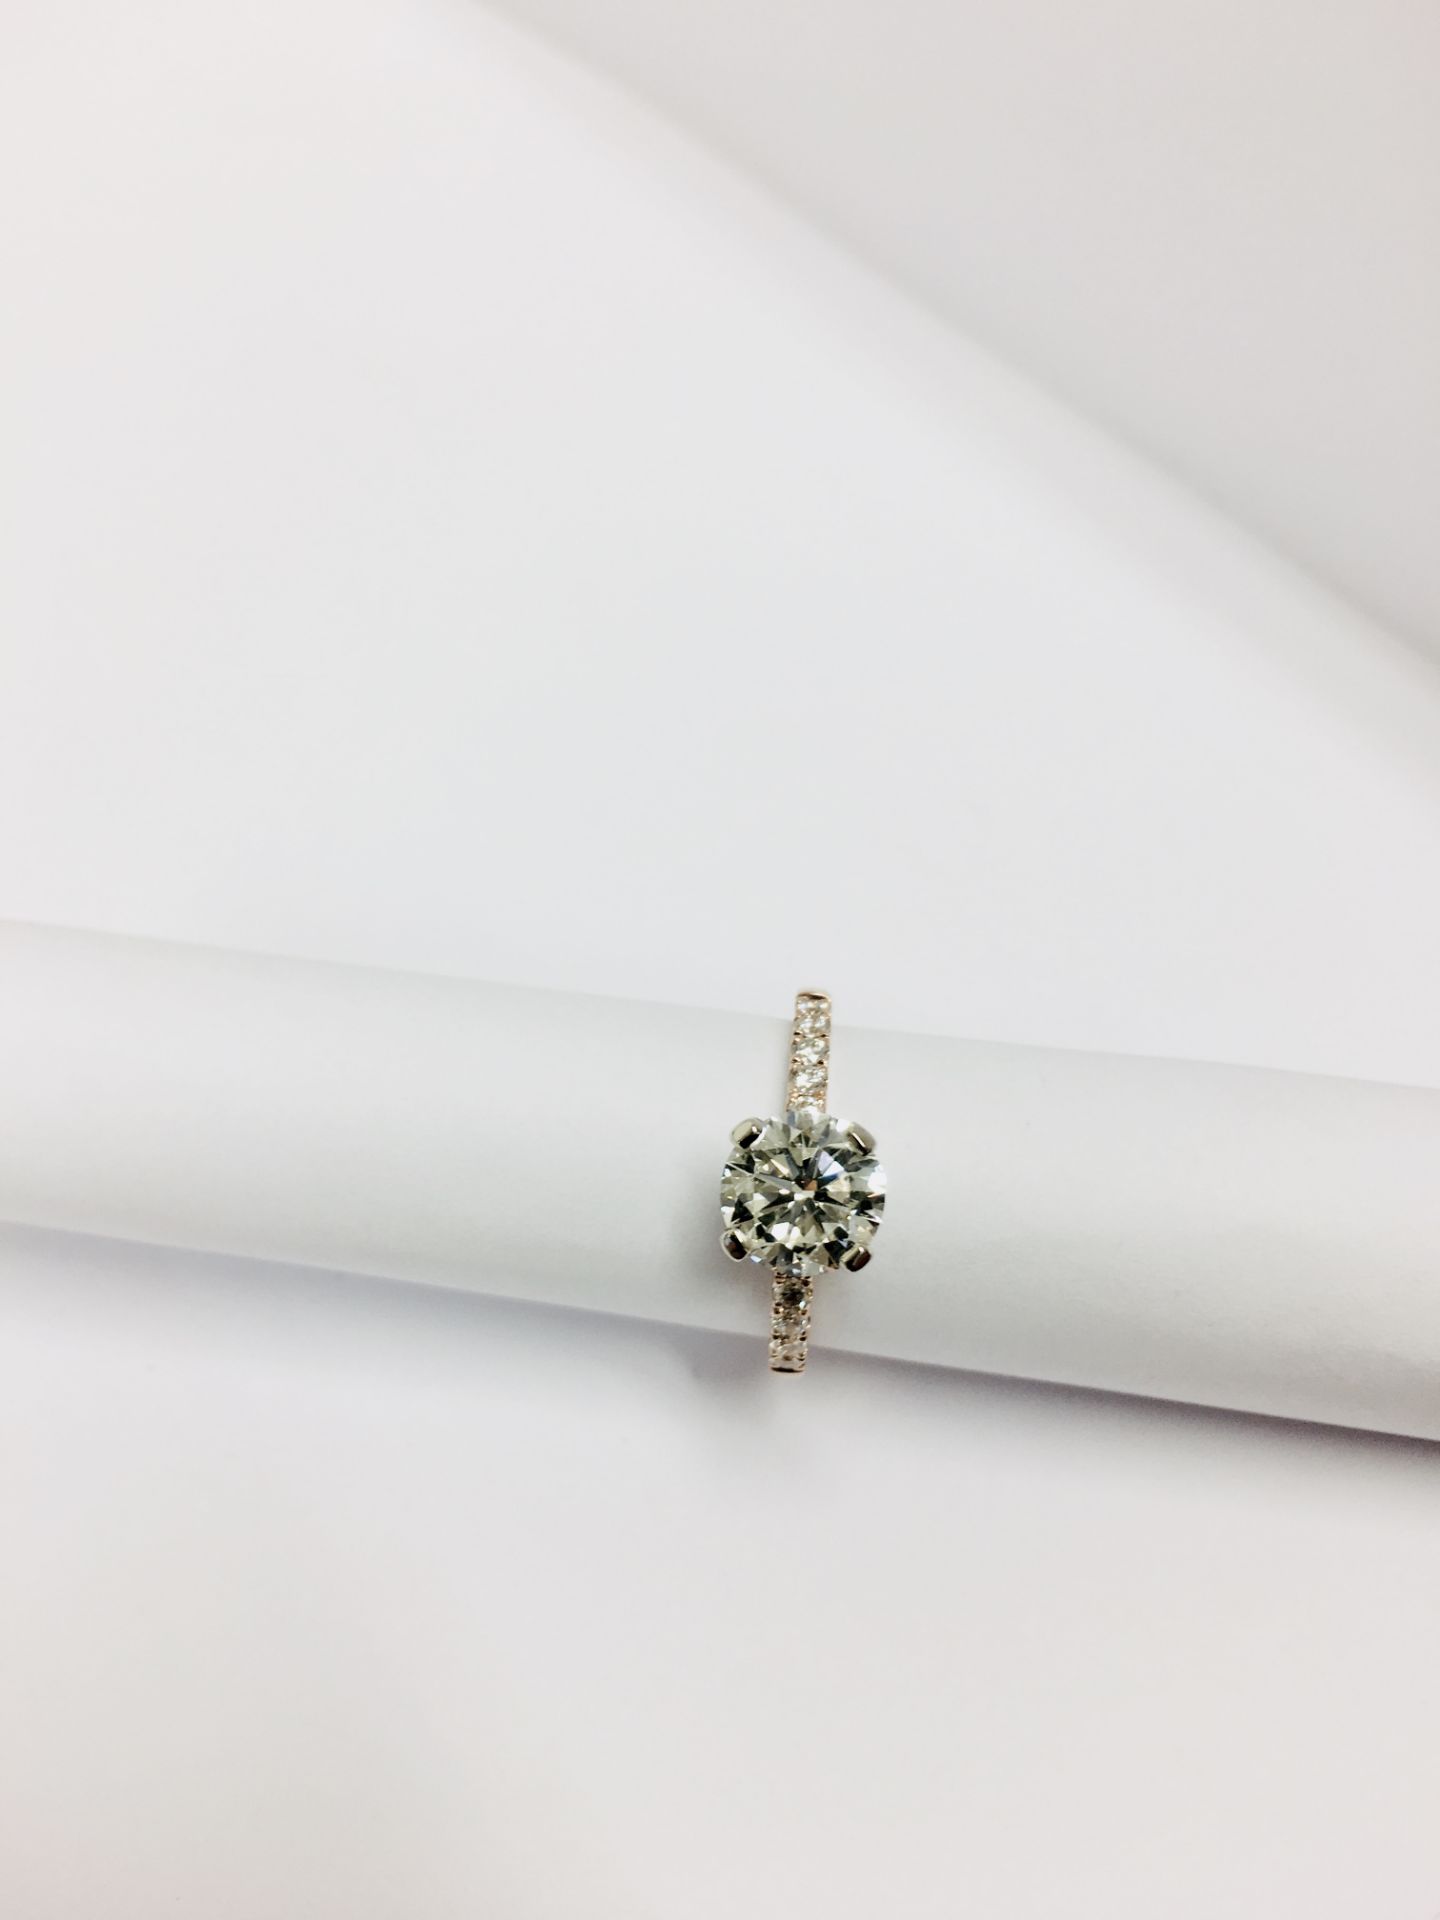 1.00Ct Diamond Solitaire Ring. - Image 2 of 16